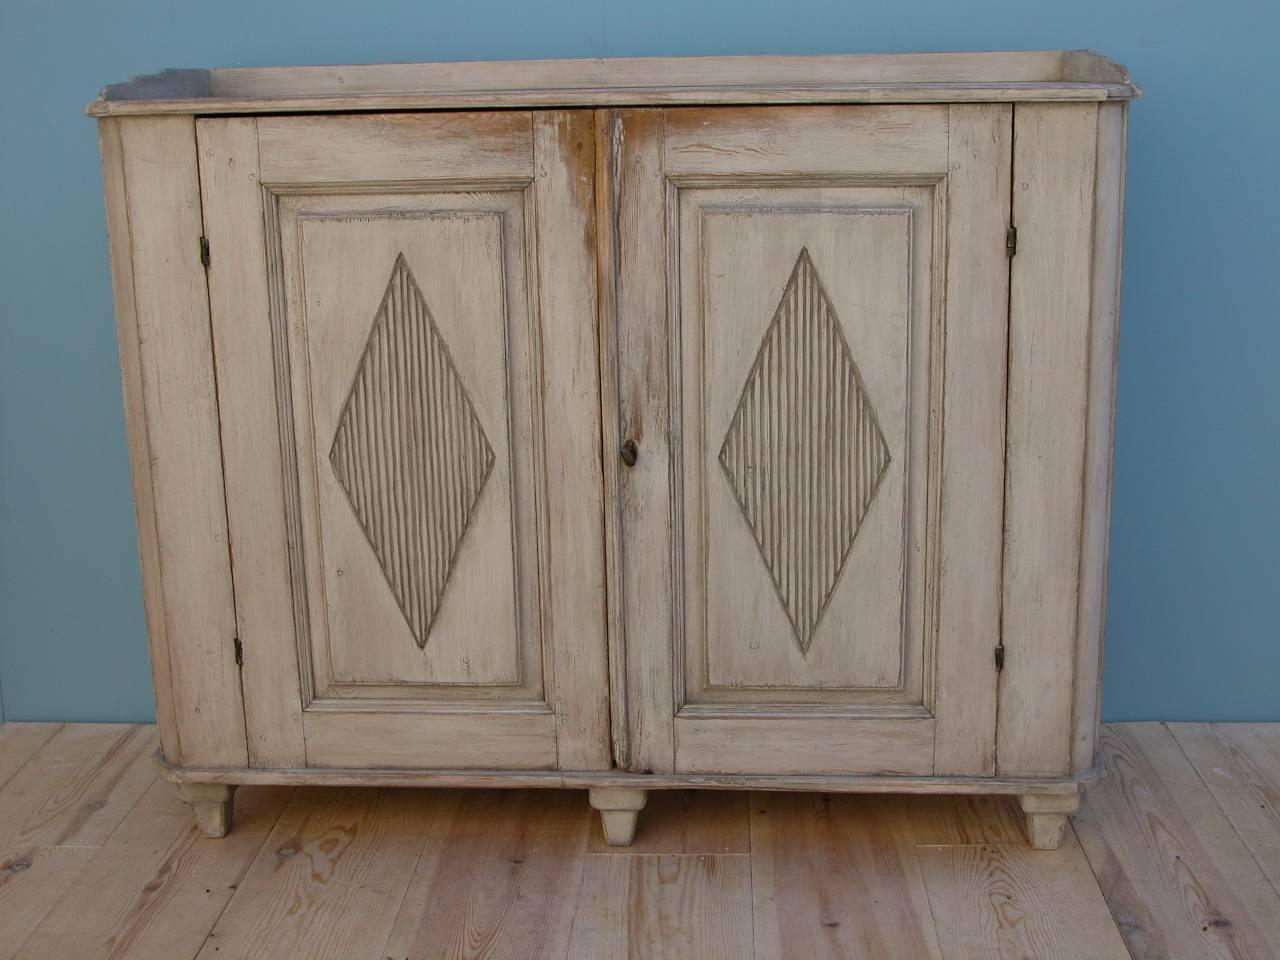 Swedish Gustavian sideboard, circa 1795, Origin: Sweden, two doors, each with hand-carved with a diamond motif, shelved interior.

The charming, imperfect hand-carved diamond designs on each door reveal the 18th century cabinetmakers hand at work. 